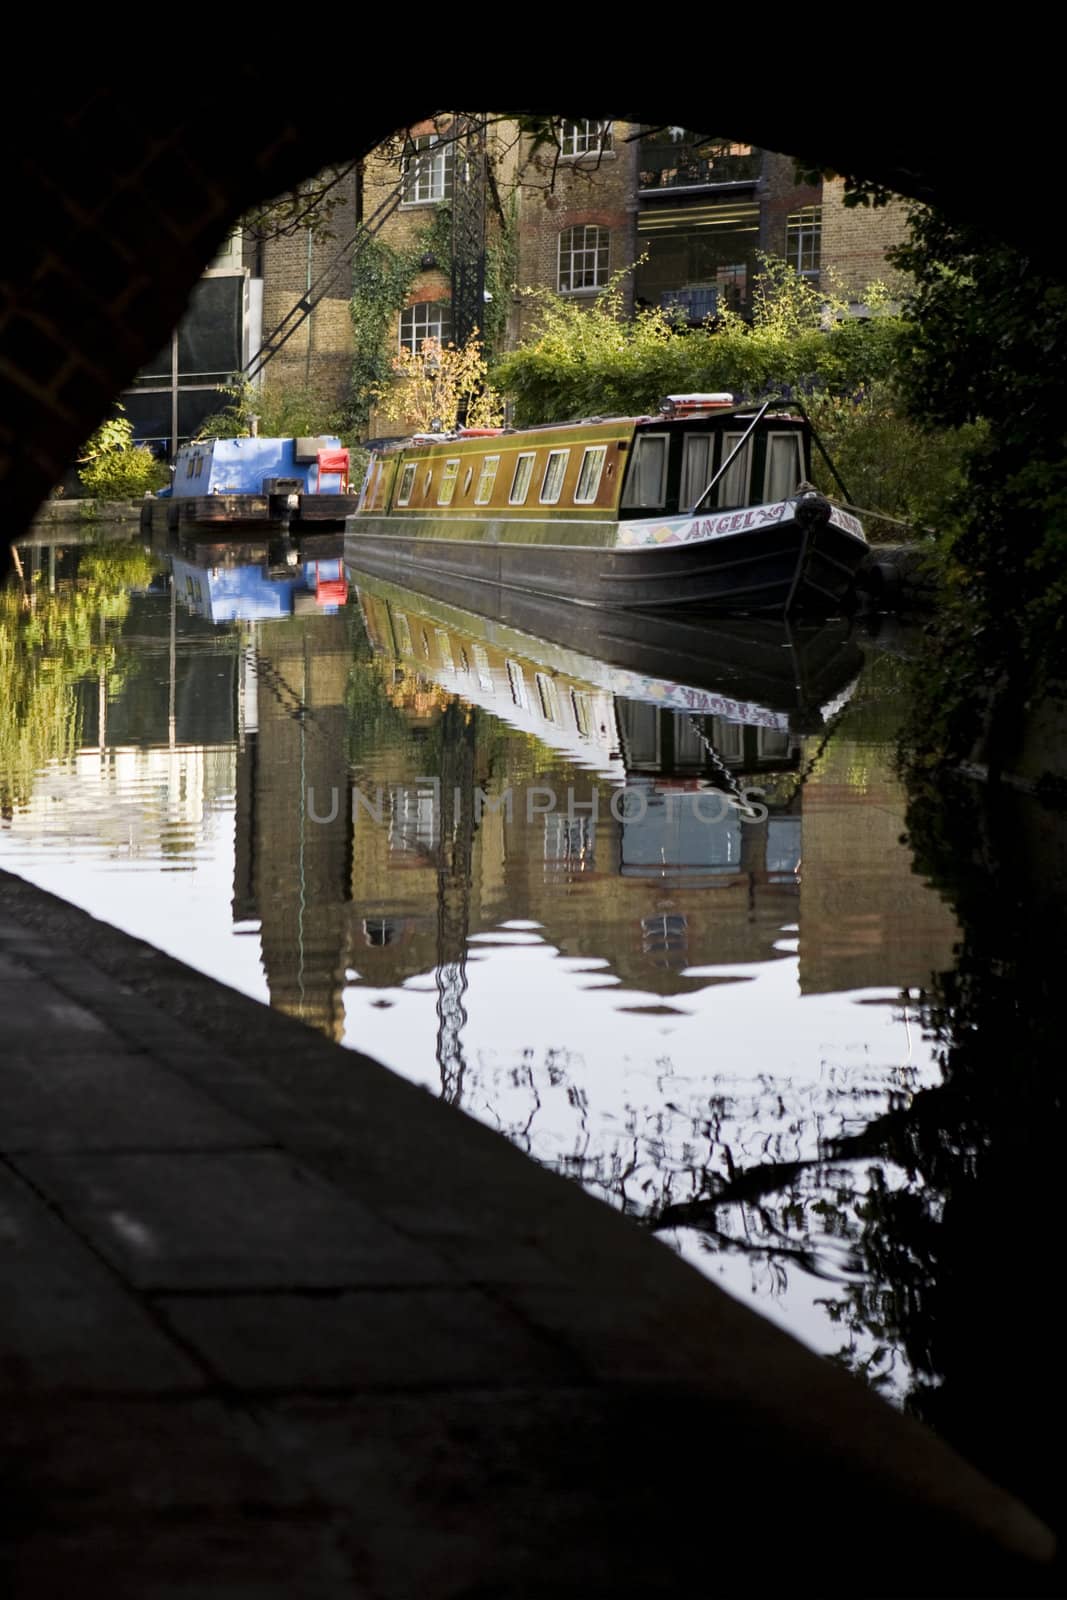 landing-stage in Regent canal